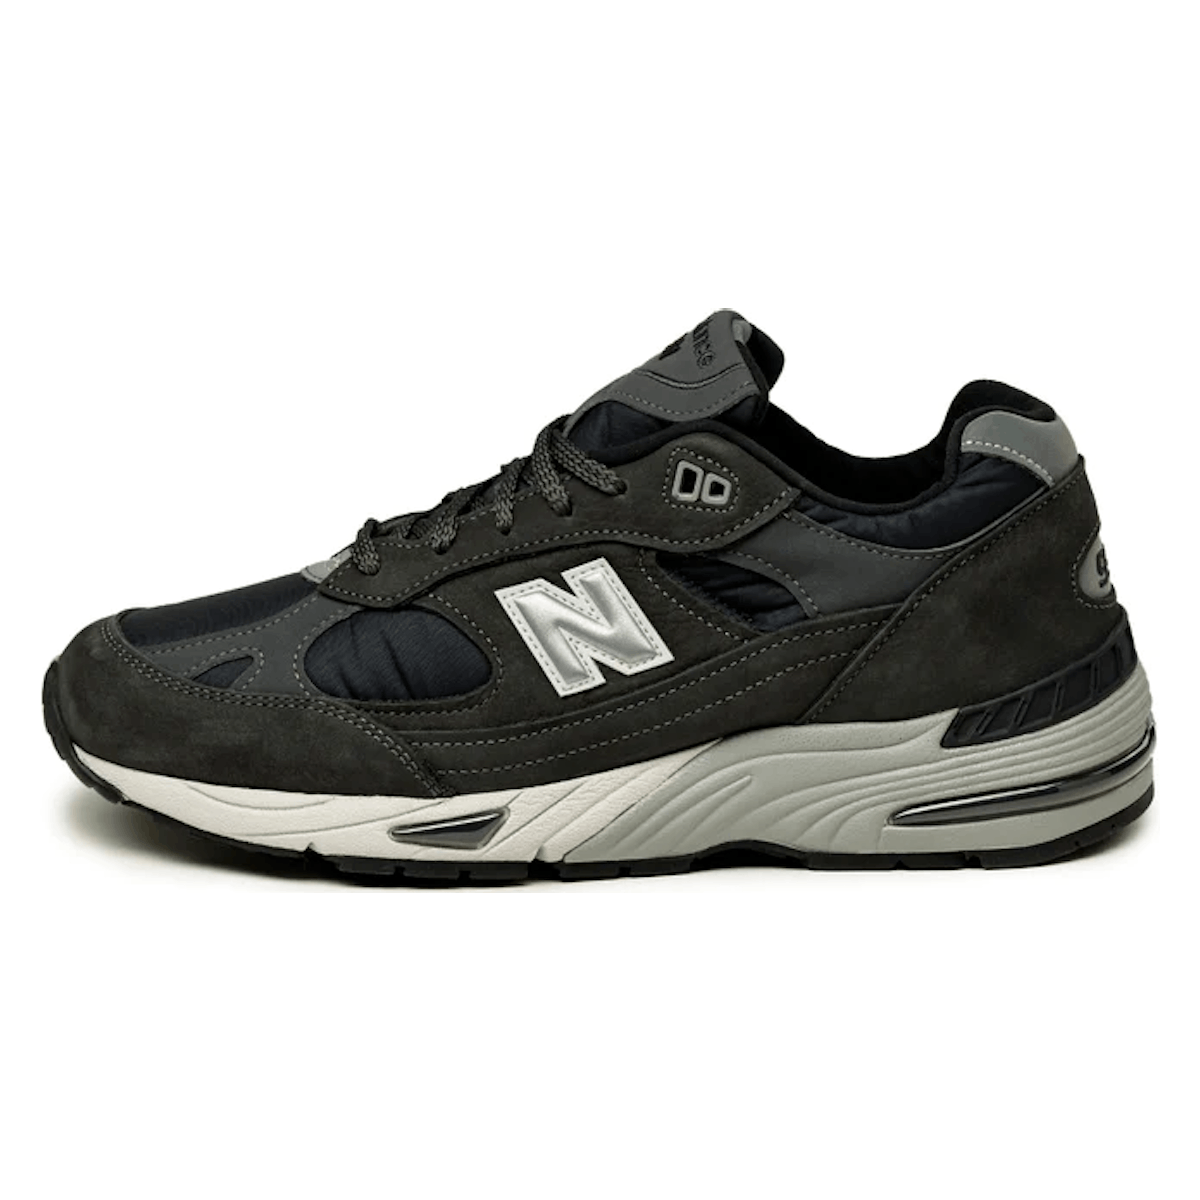 New Balance 991 Made in England "Magnet"